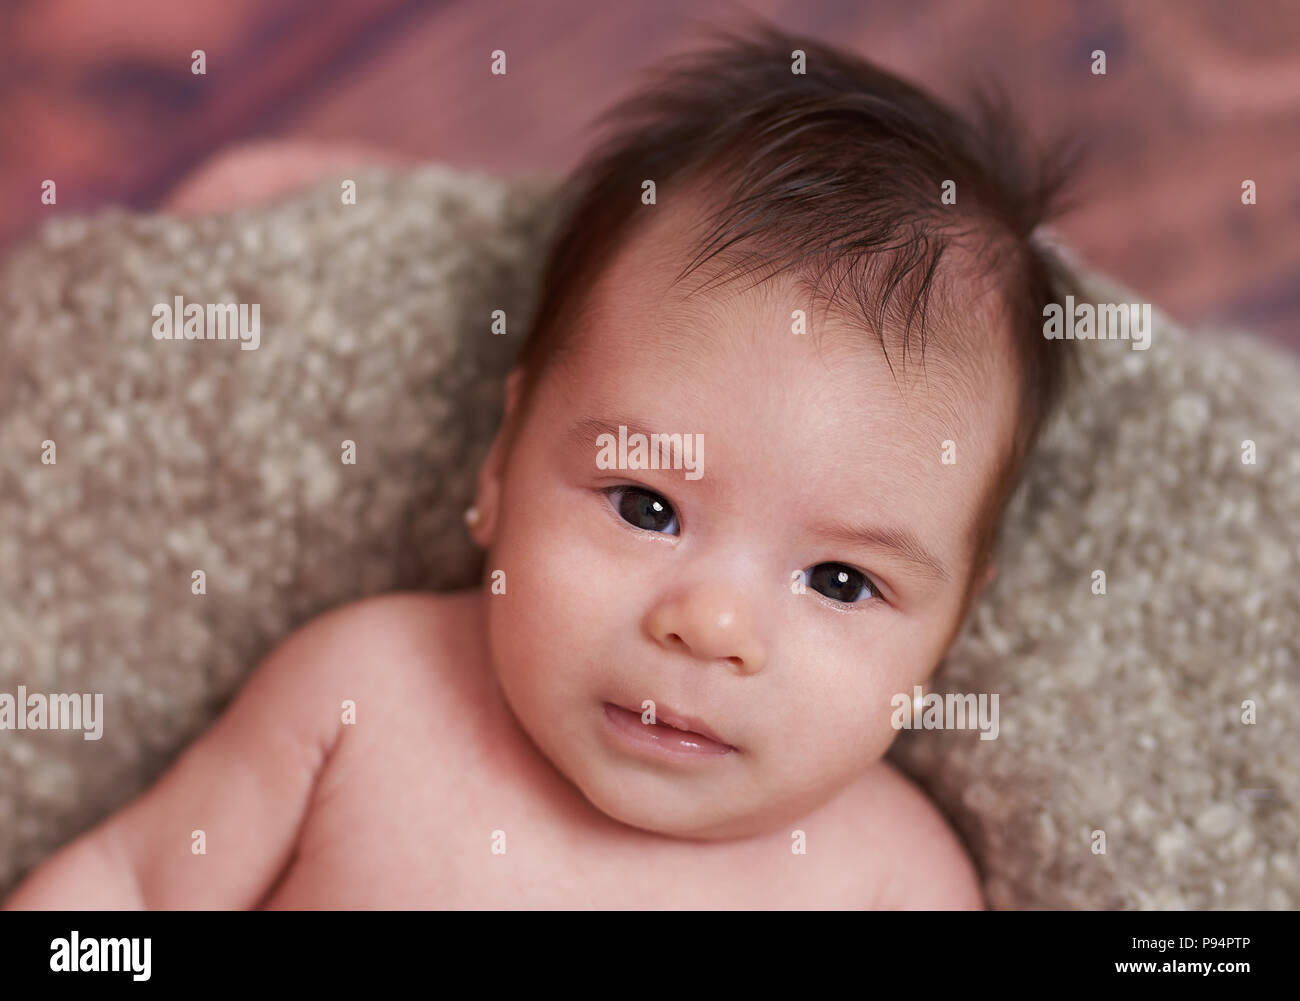 Portrait of small baby girl laying on gray blanket background Stock Photo